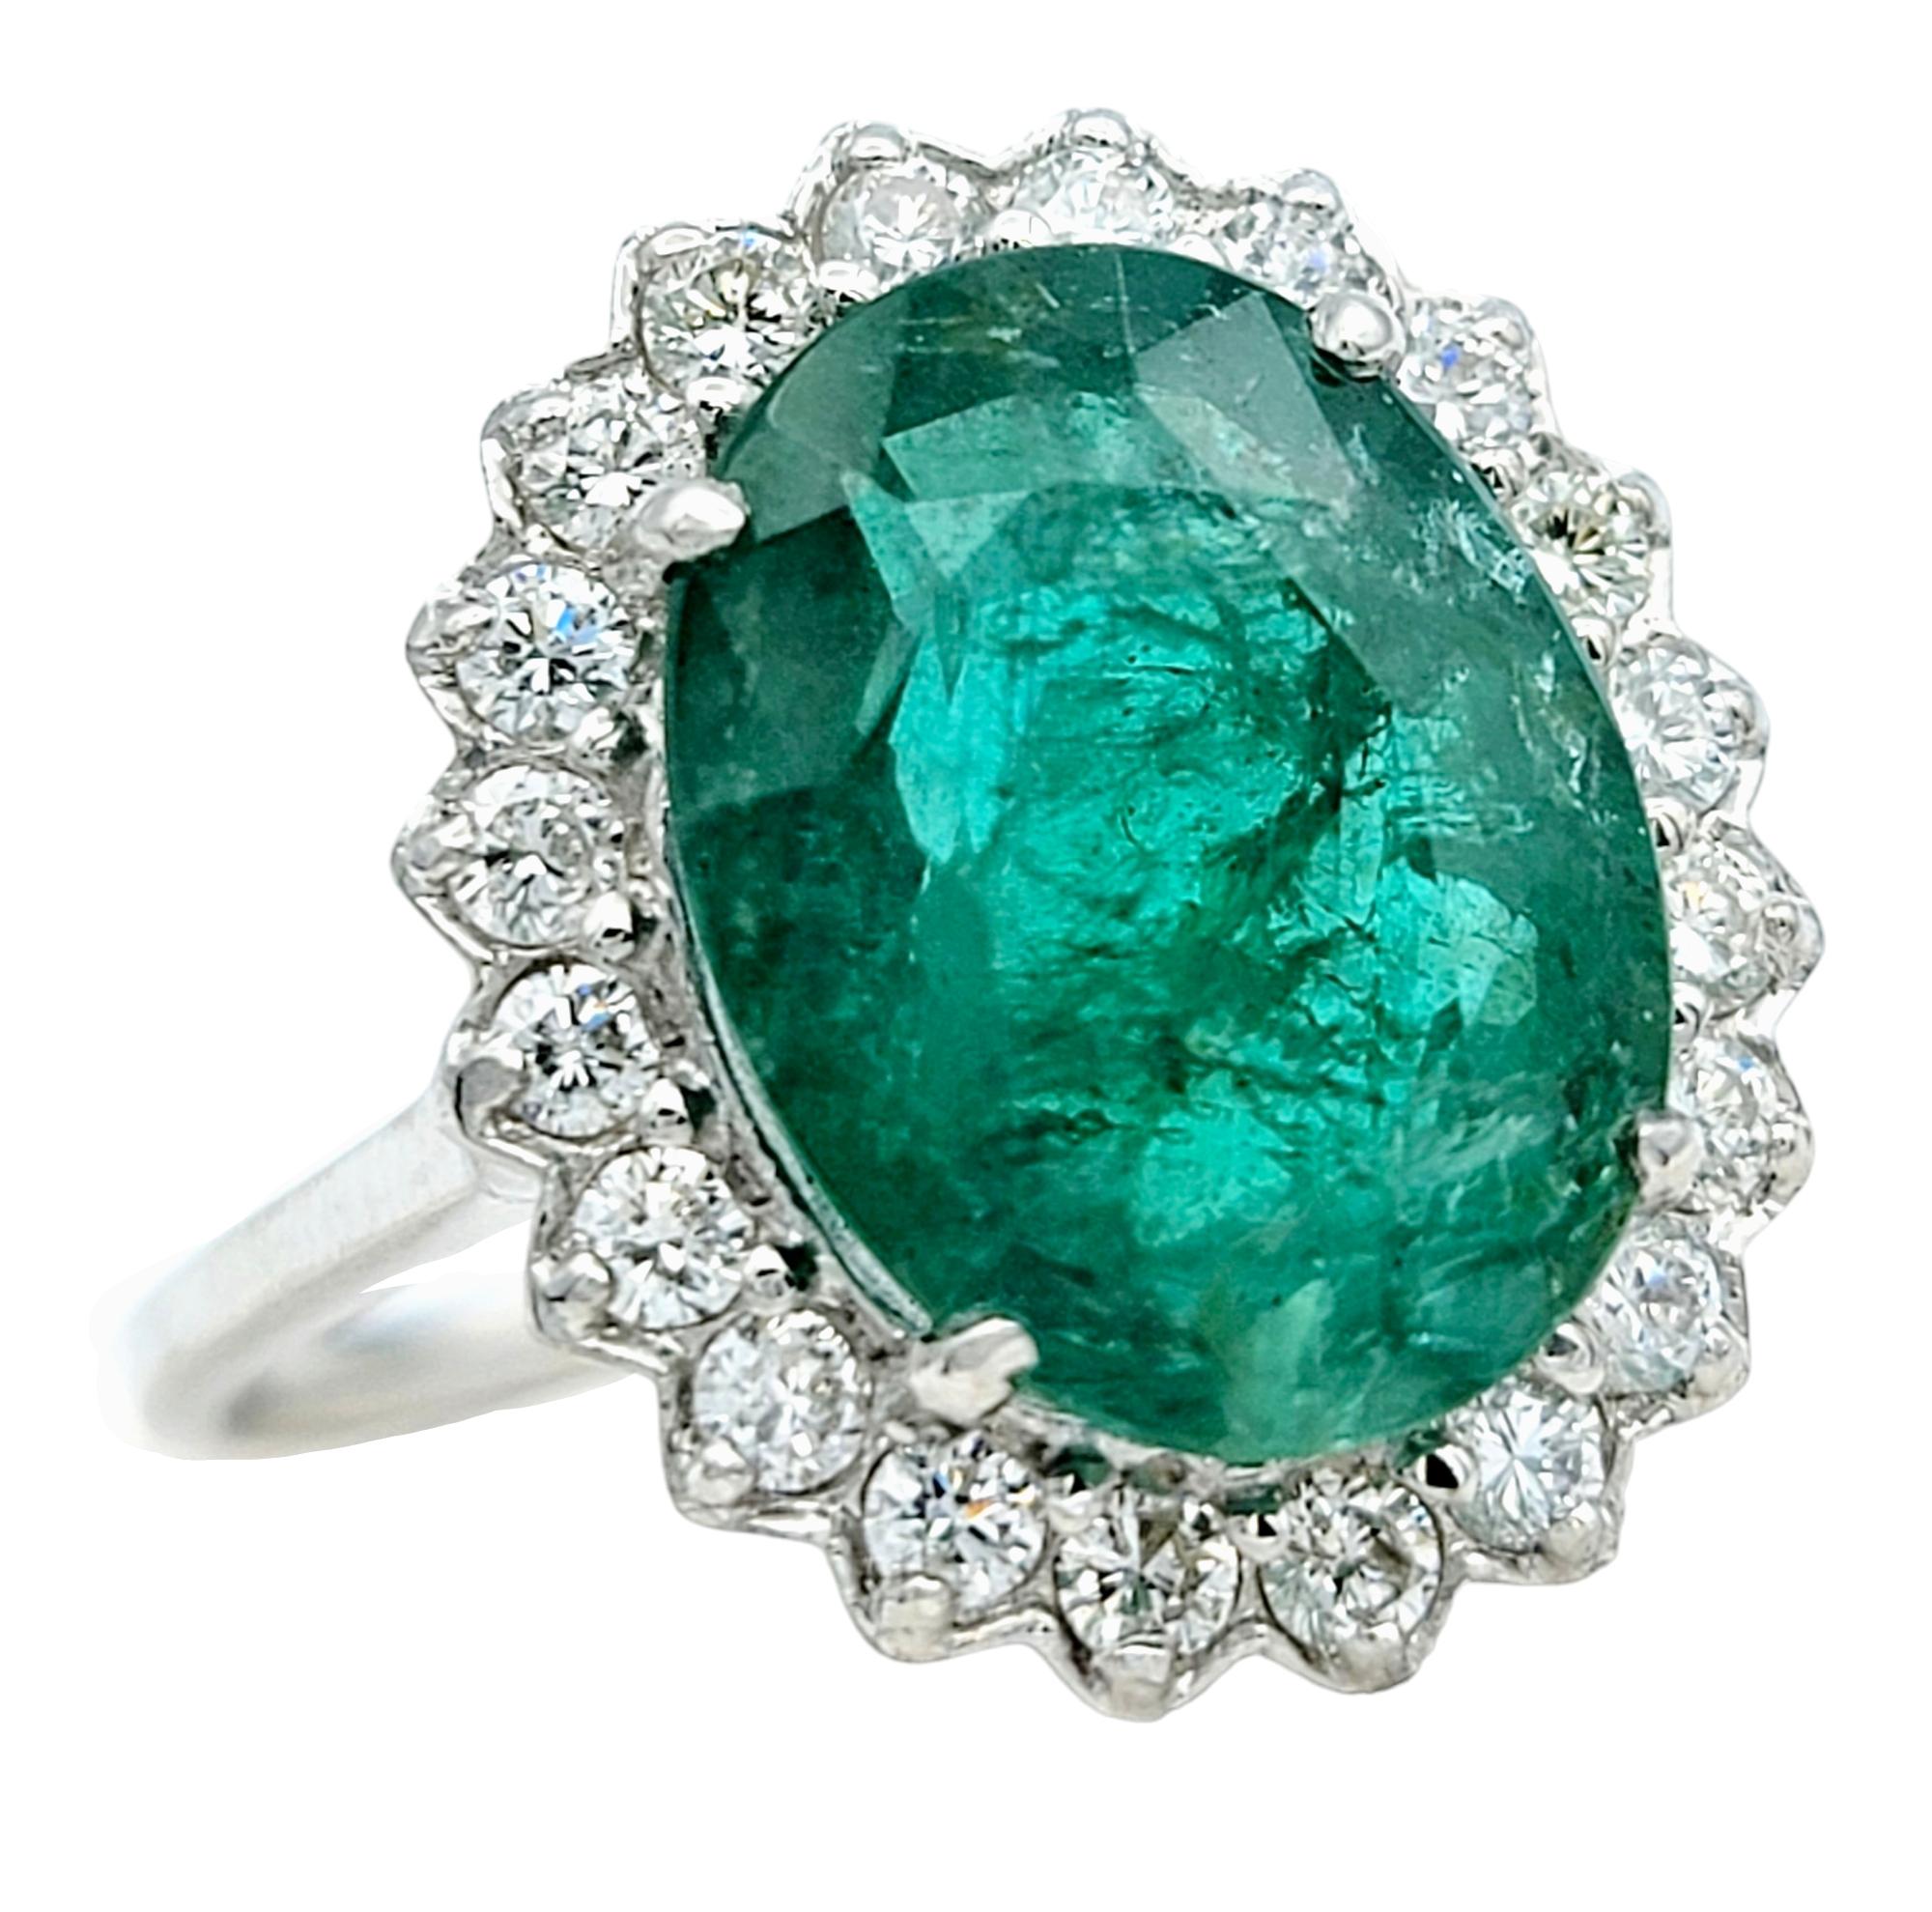 Contemporary 4.98 Carat Oval Cut Emerald and Diamond Halo Ring Set in 18 Karat White Gold For Sale